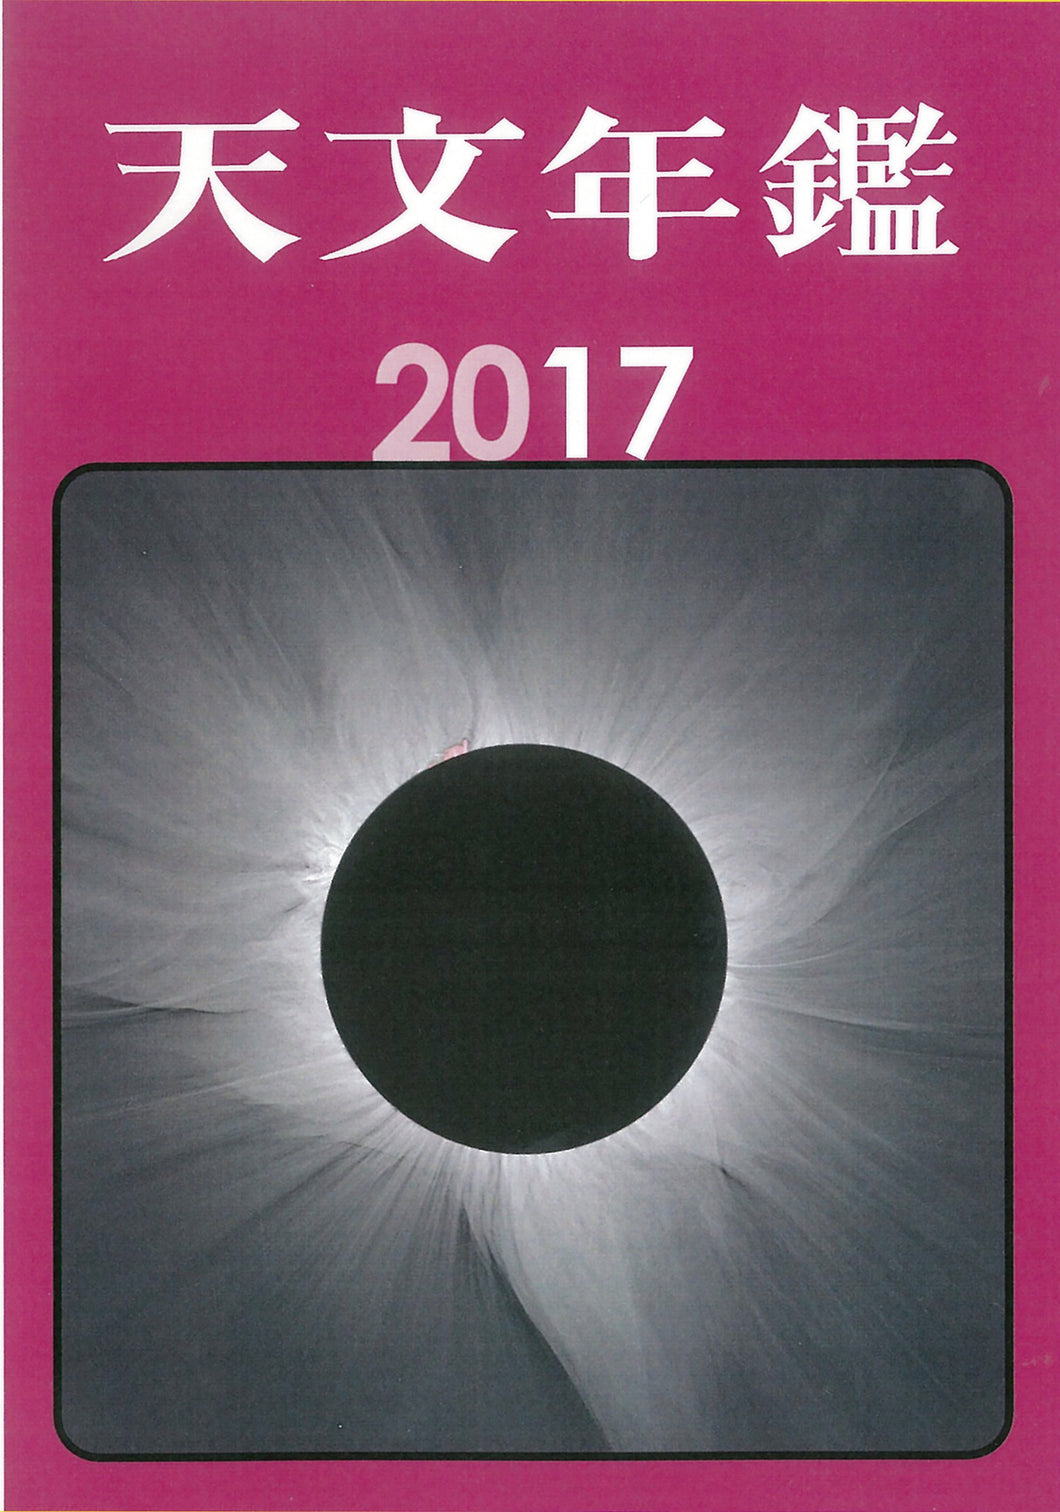 Astronomical Yearbook 2017